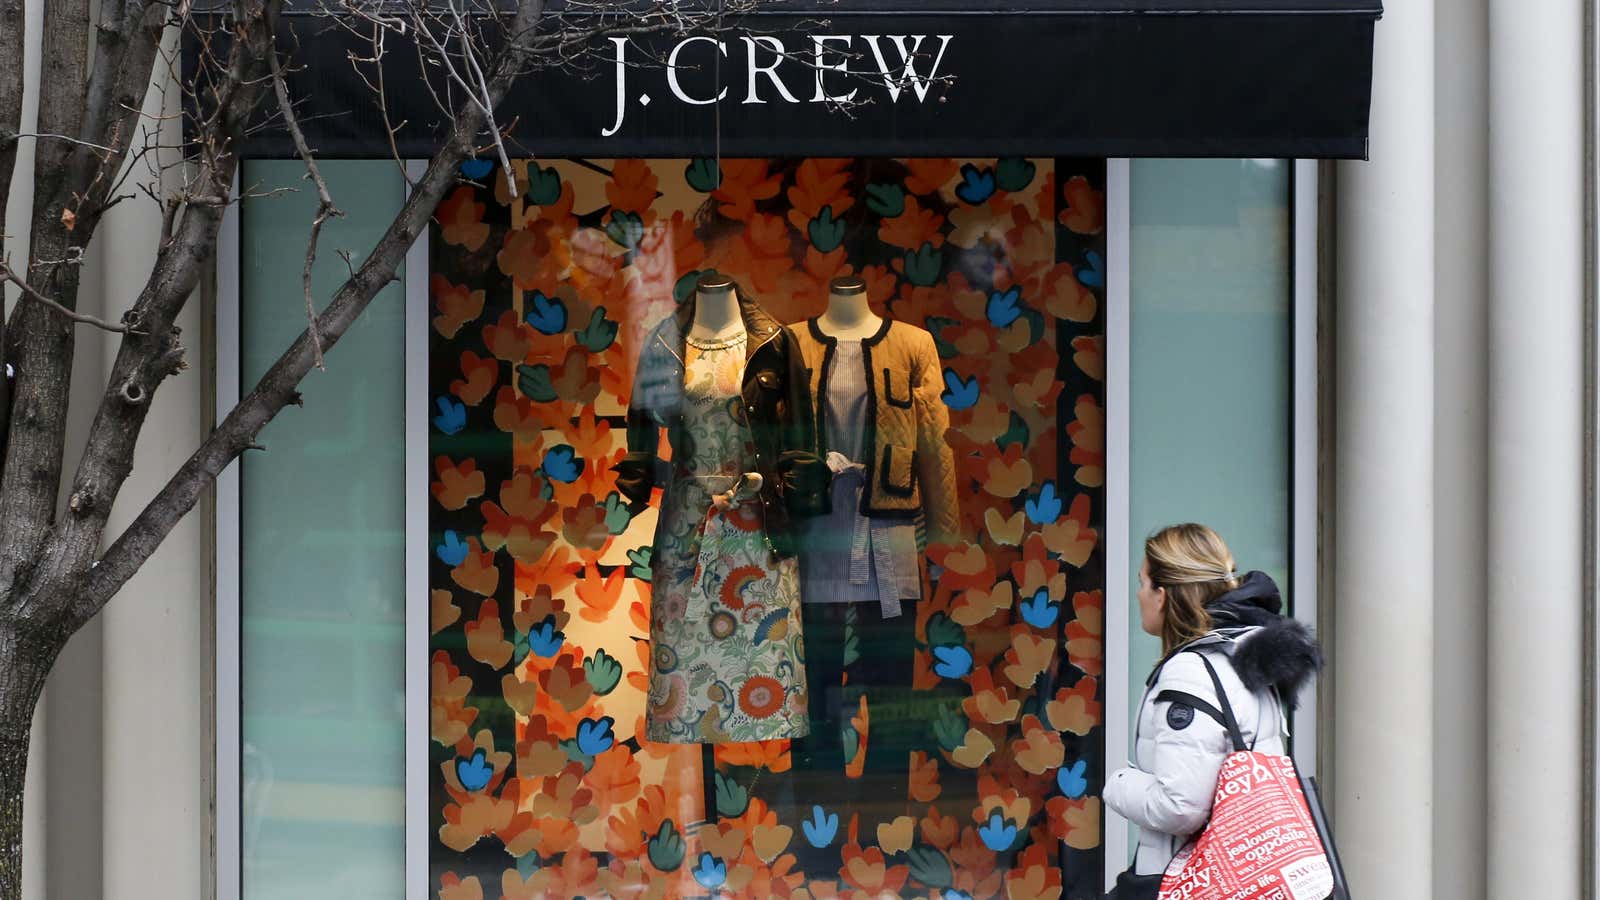 J.Crew wants to be the place for everyone again.